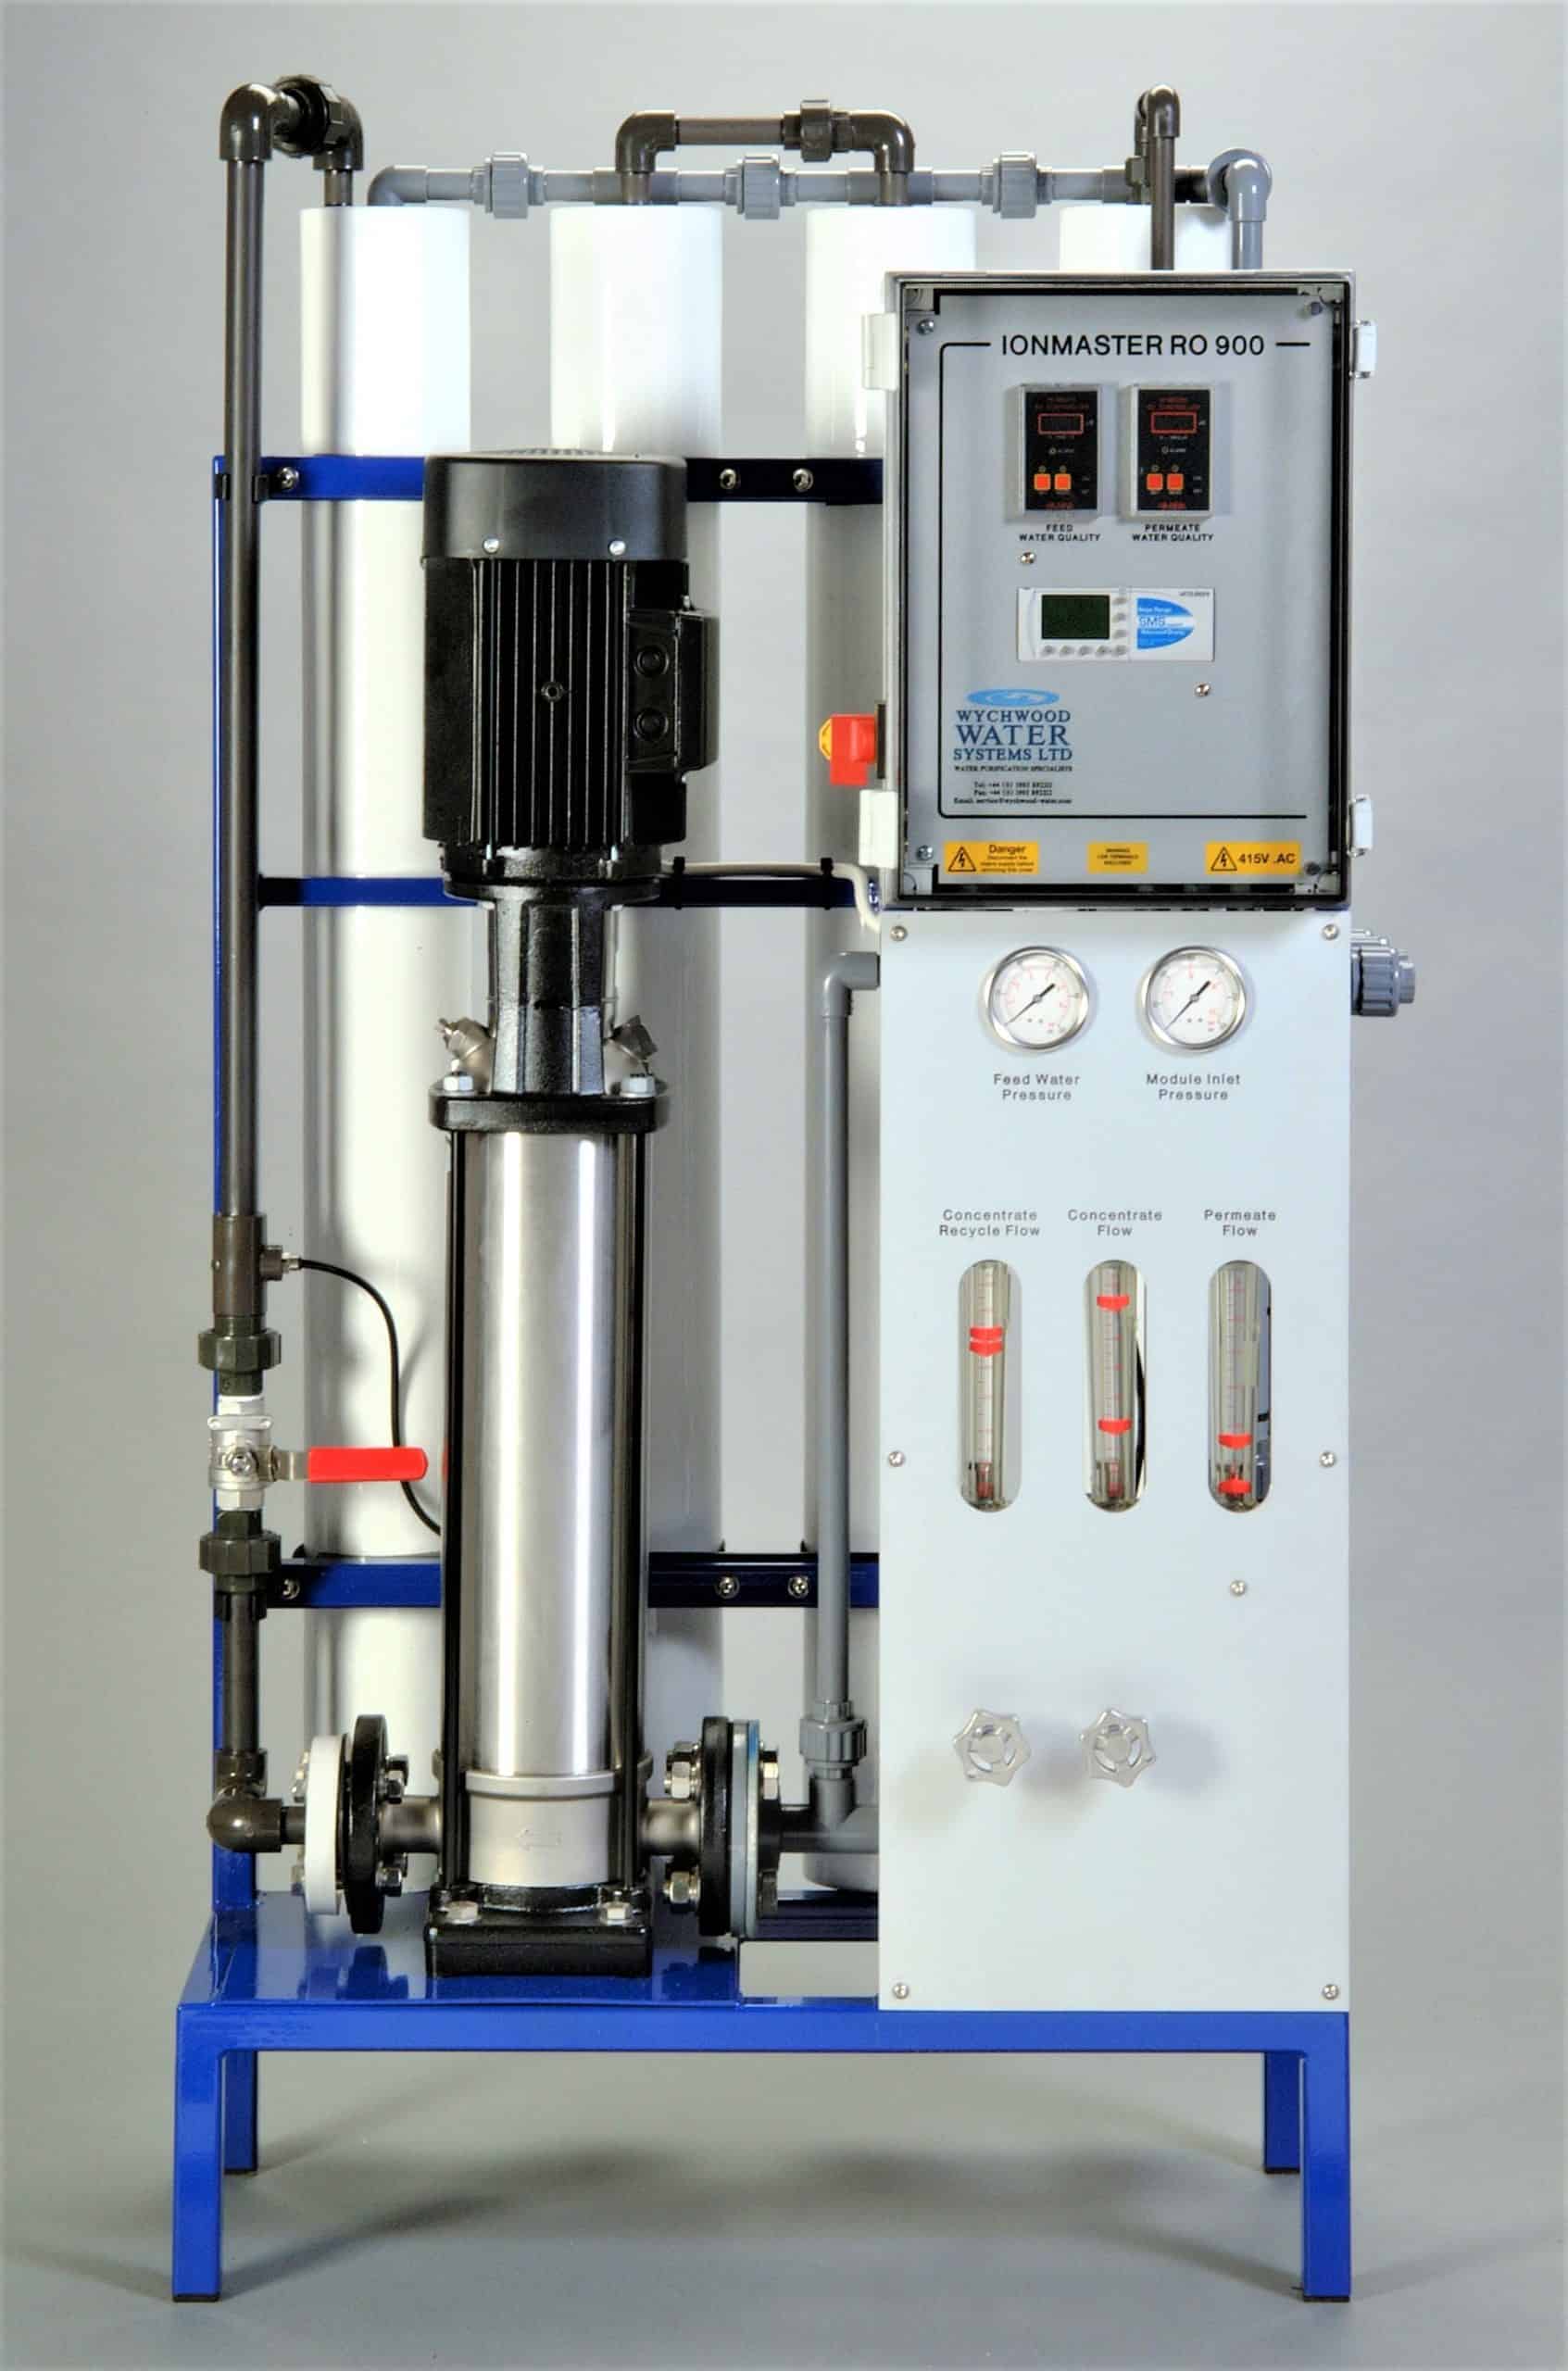 Ionmaster RO 900 — reverse osmosis system